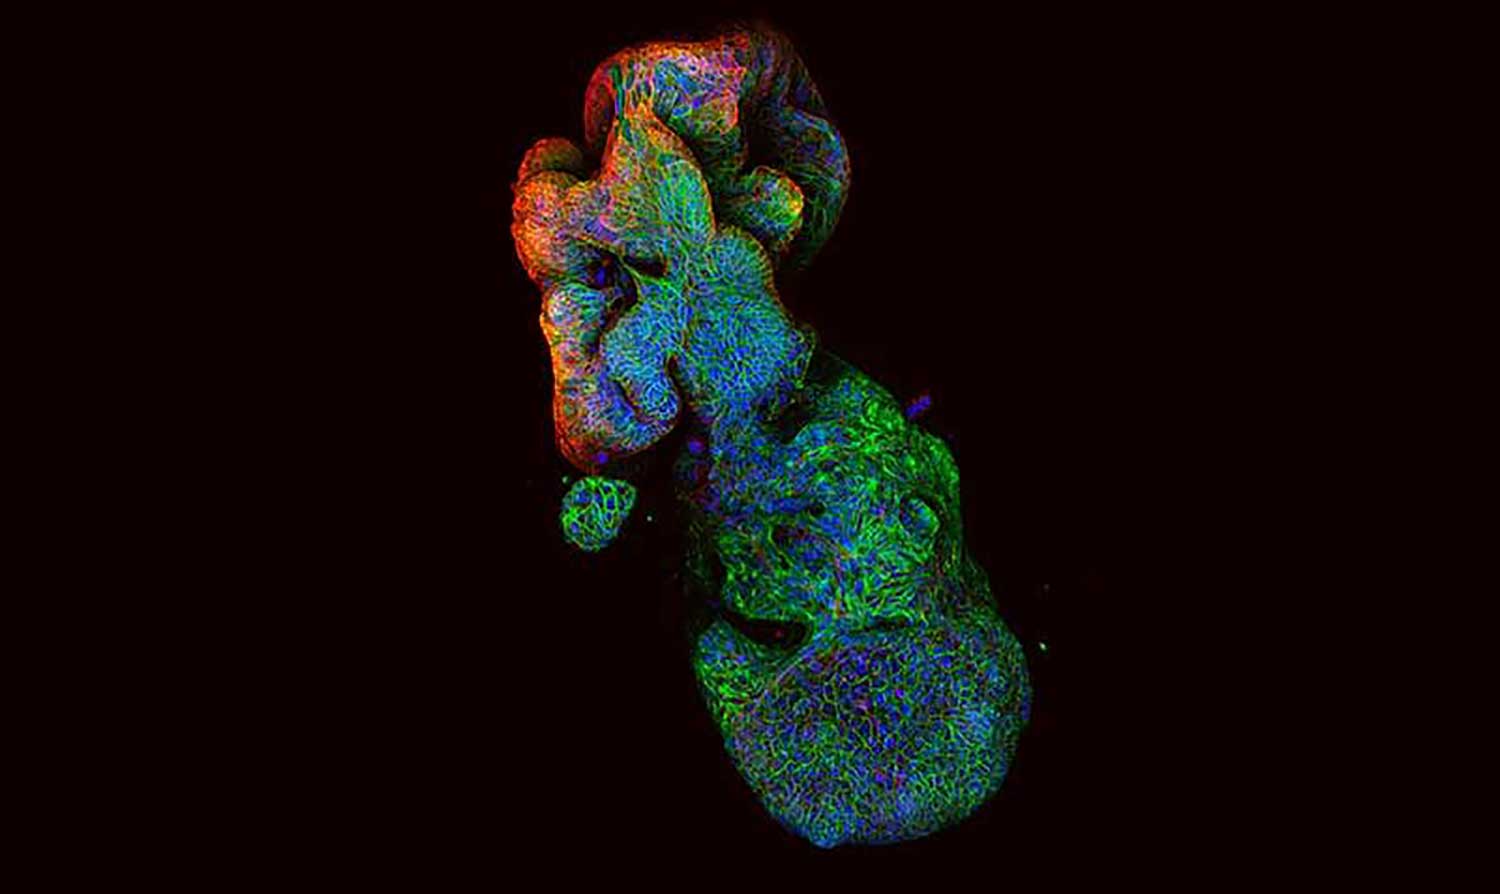 3D structure of an organoid